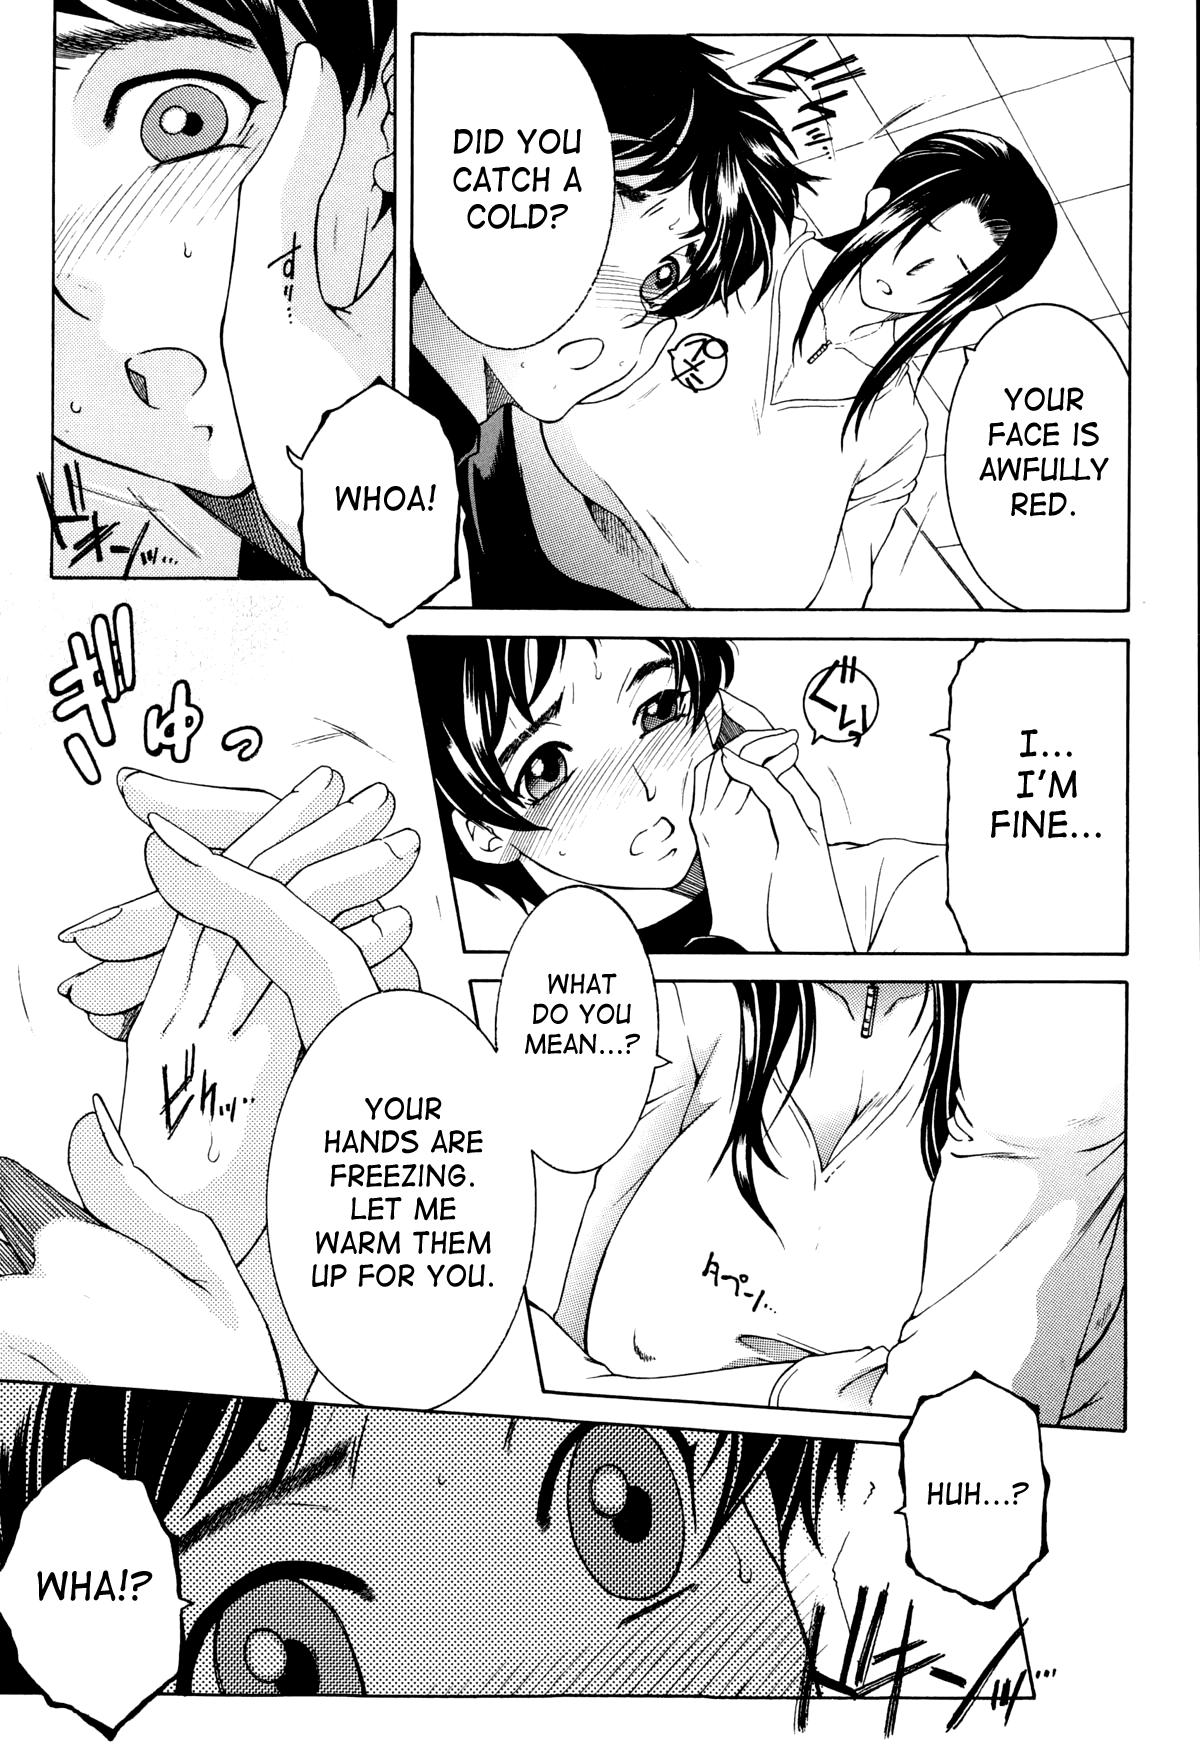 Russian Boku no Katei Chijou act.1 | My Family Passion Gaystraight - Page 5